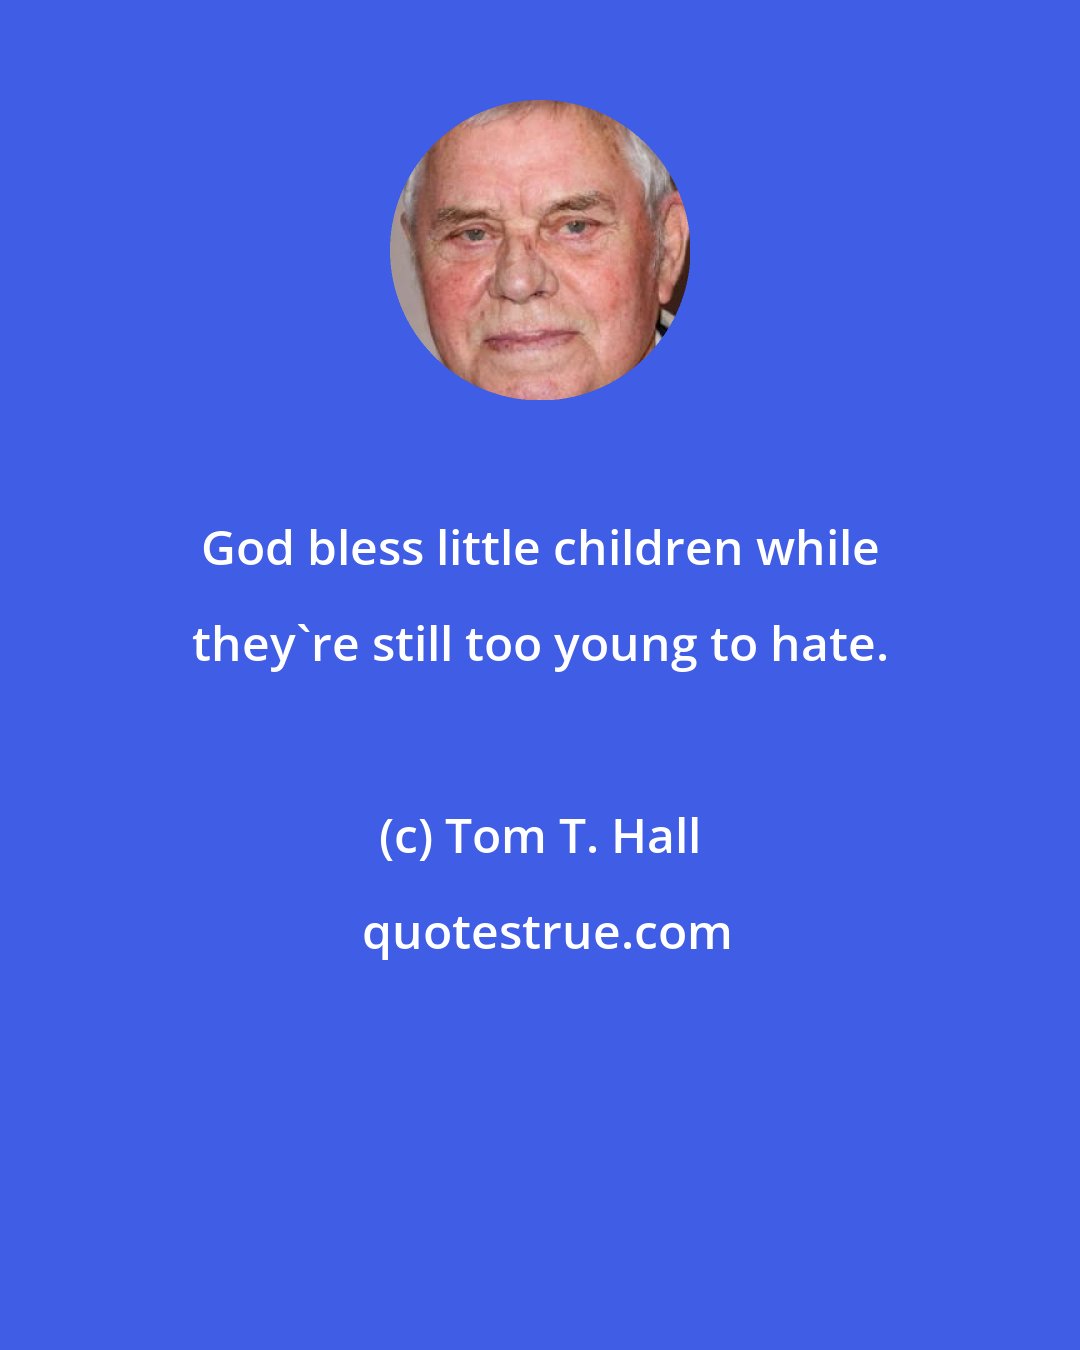 Tom T. Hall: God bless little children while they're still too young to hate.